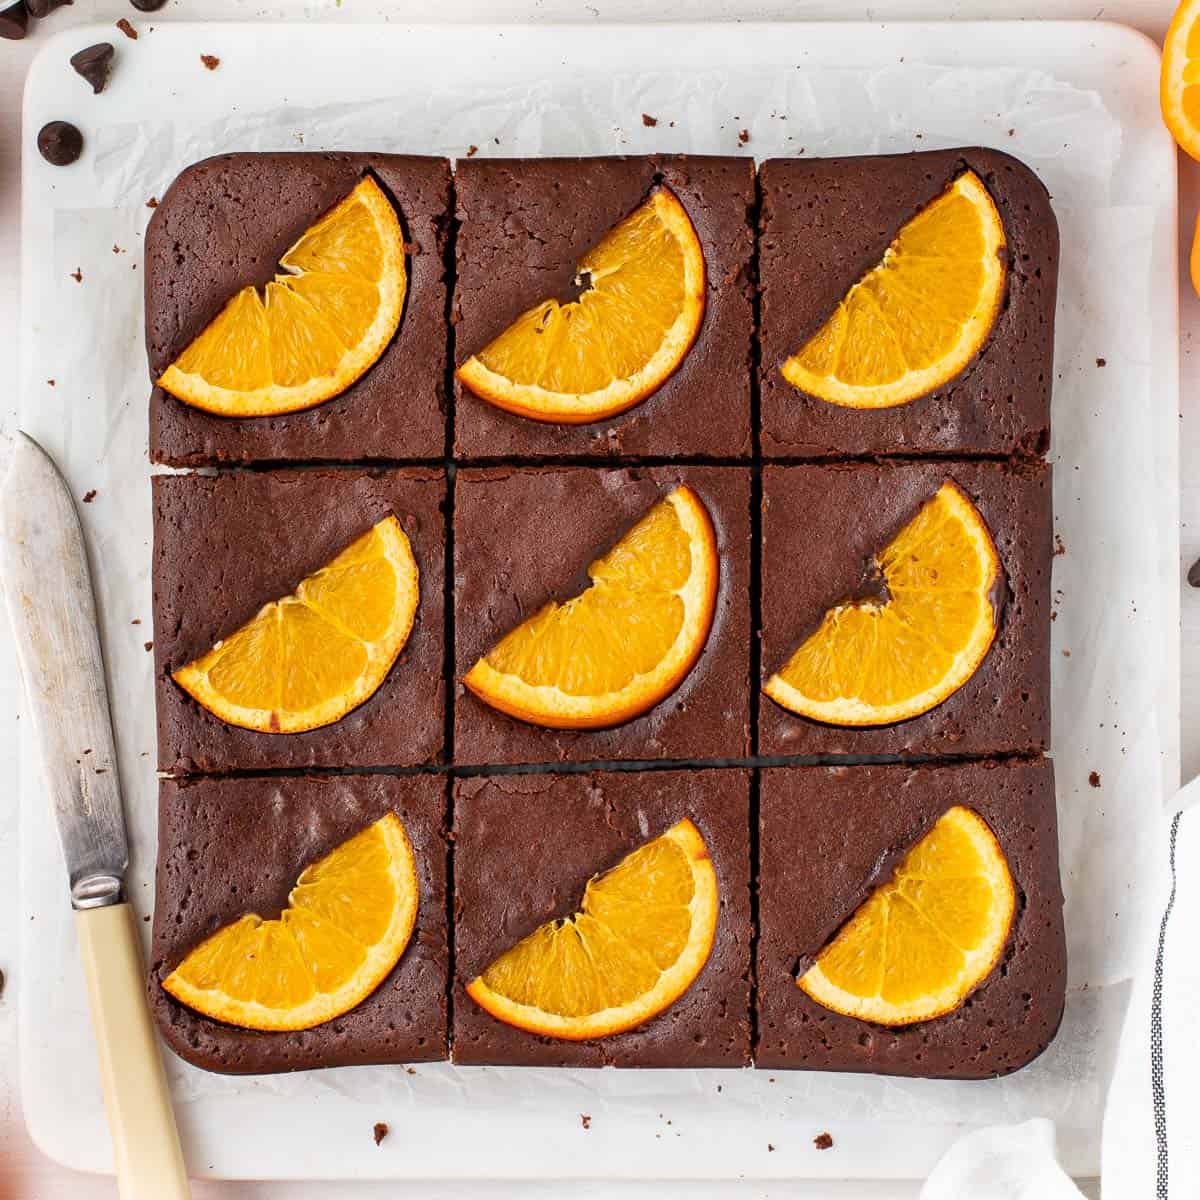 Brownies sliced in 9 on a marble cutting board seen from above.